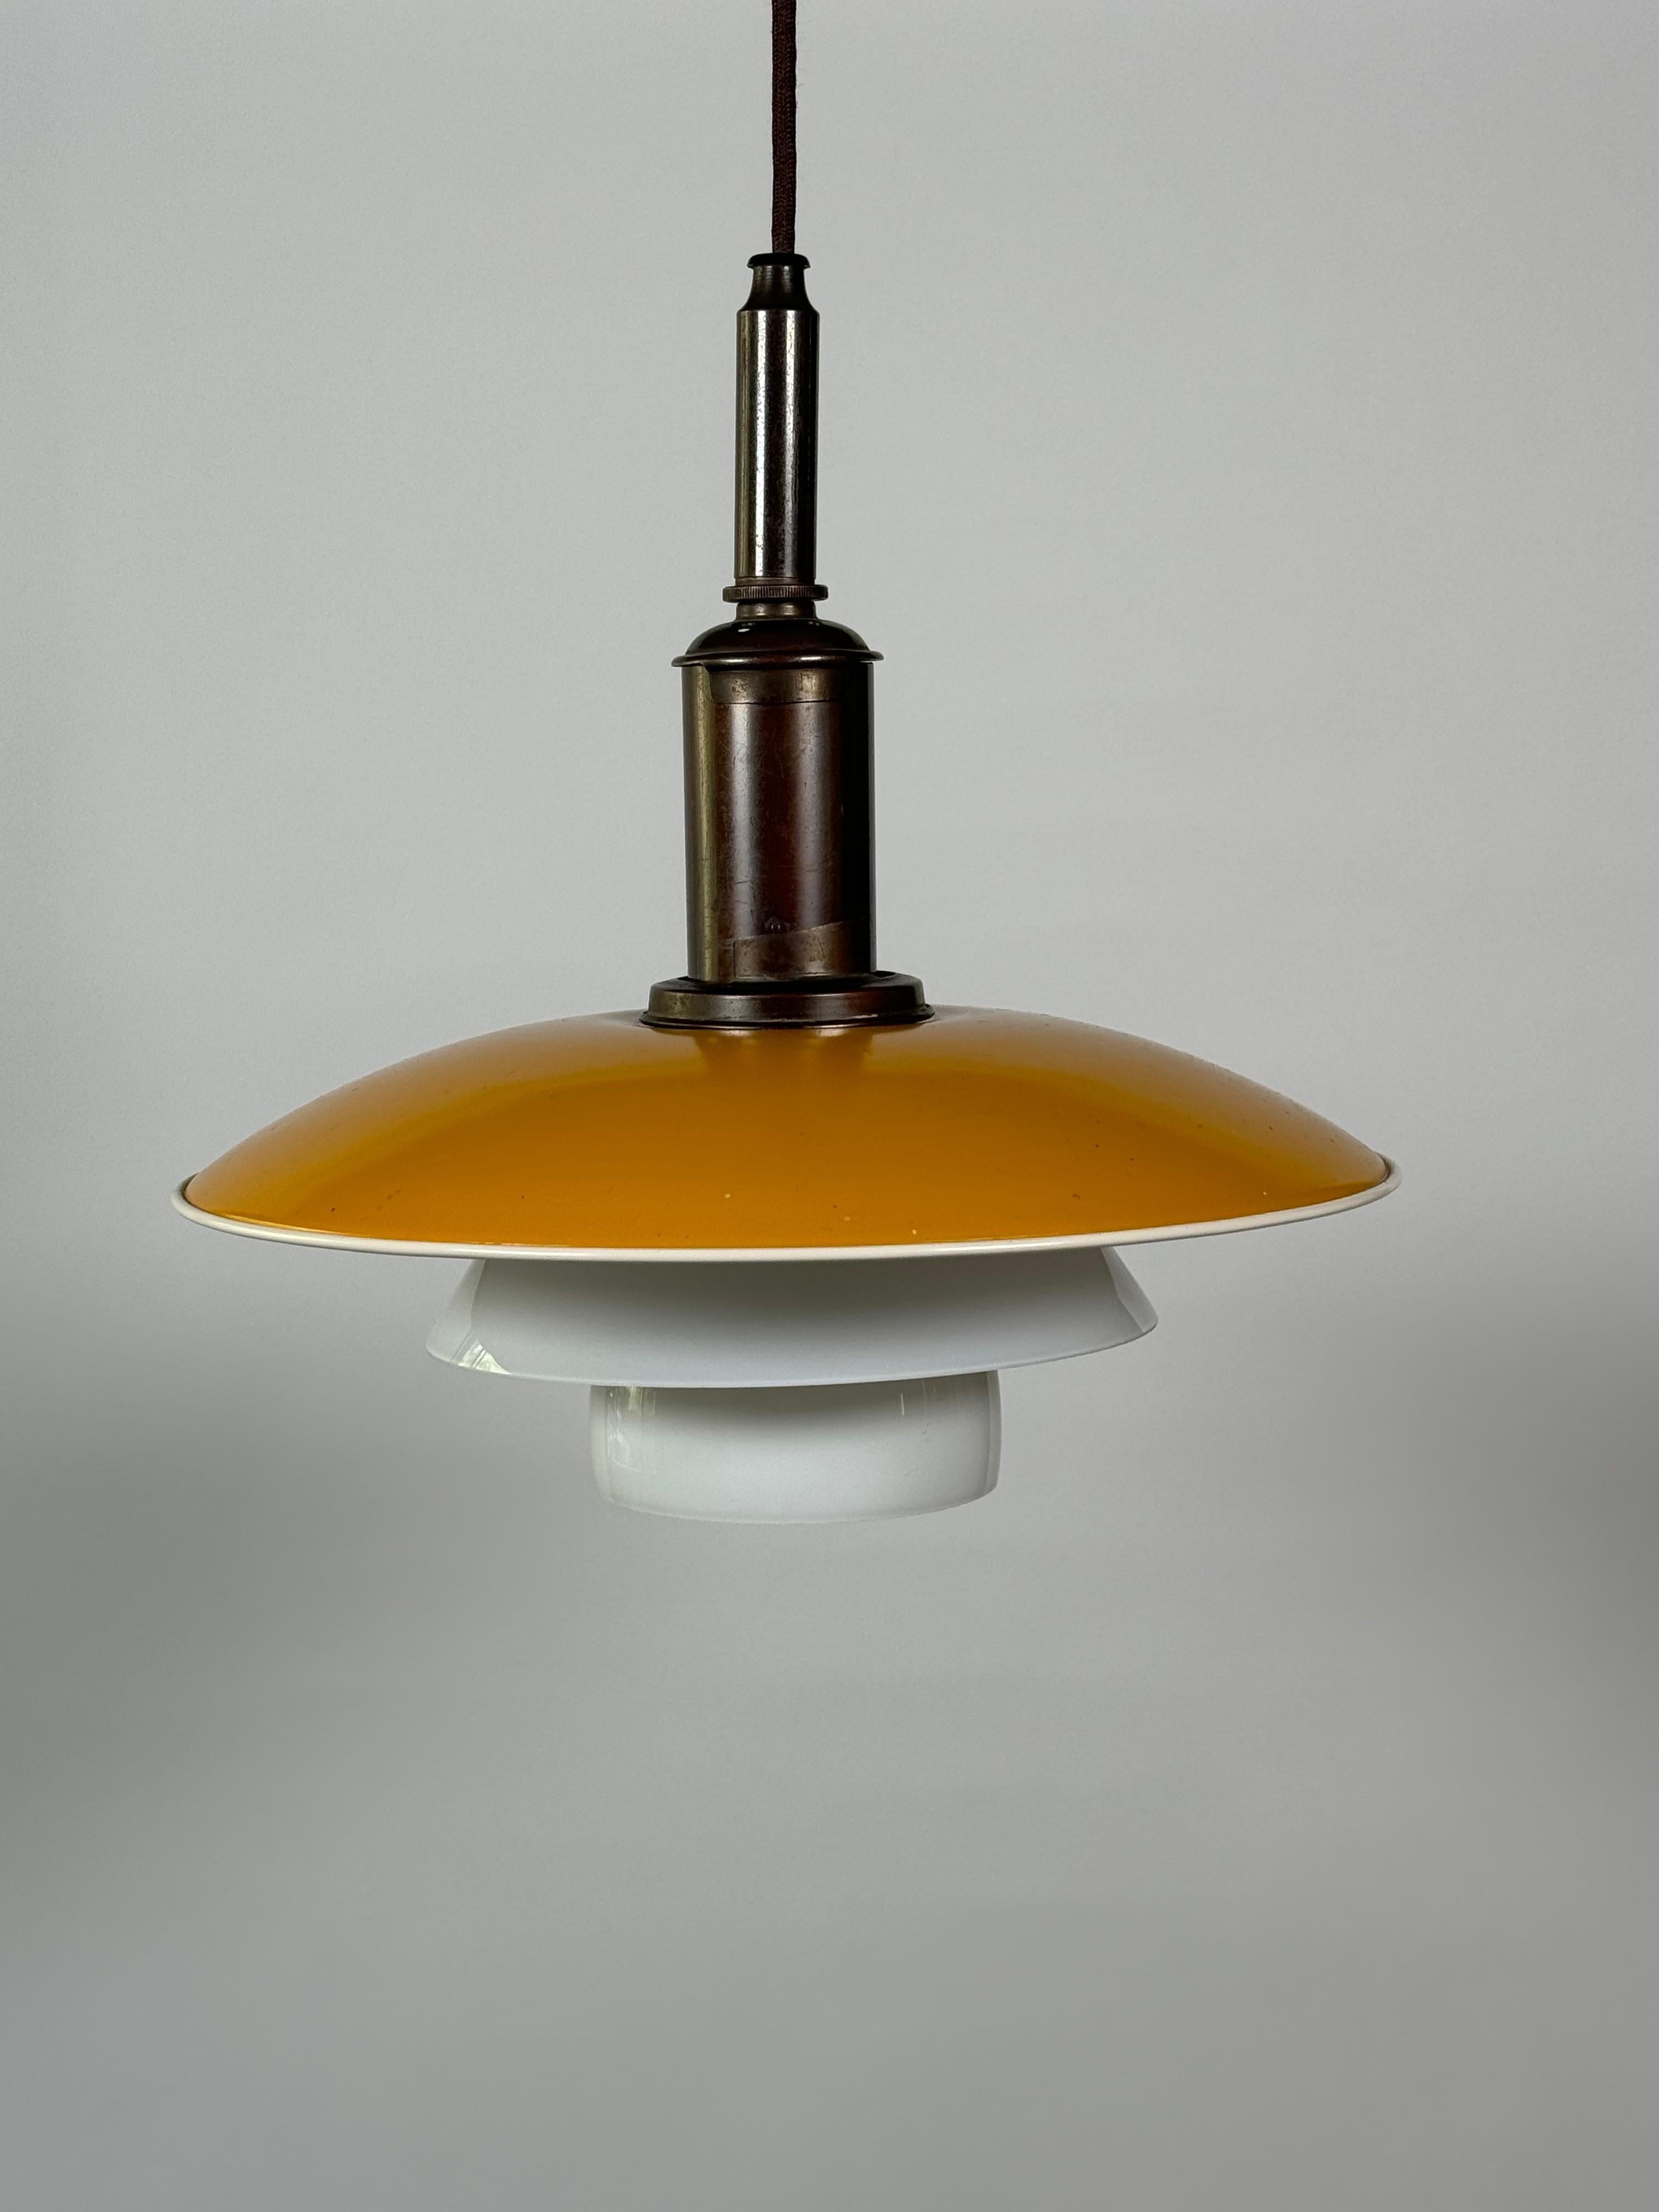 Early 1930s Poul Henningsen 3/2 pendant lamp for Louis Poulsen & Co. of Denmark. Copper and glass construction, the top shade in a lacquered mustard colored copper shade and the bottom two diffusers are in white glass and copper hardware for the